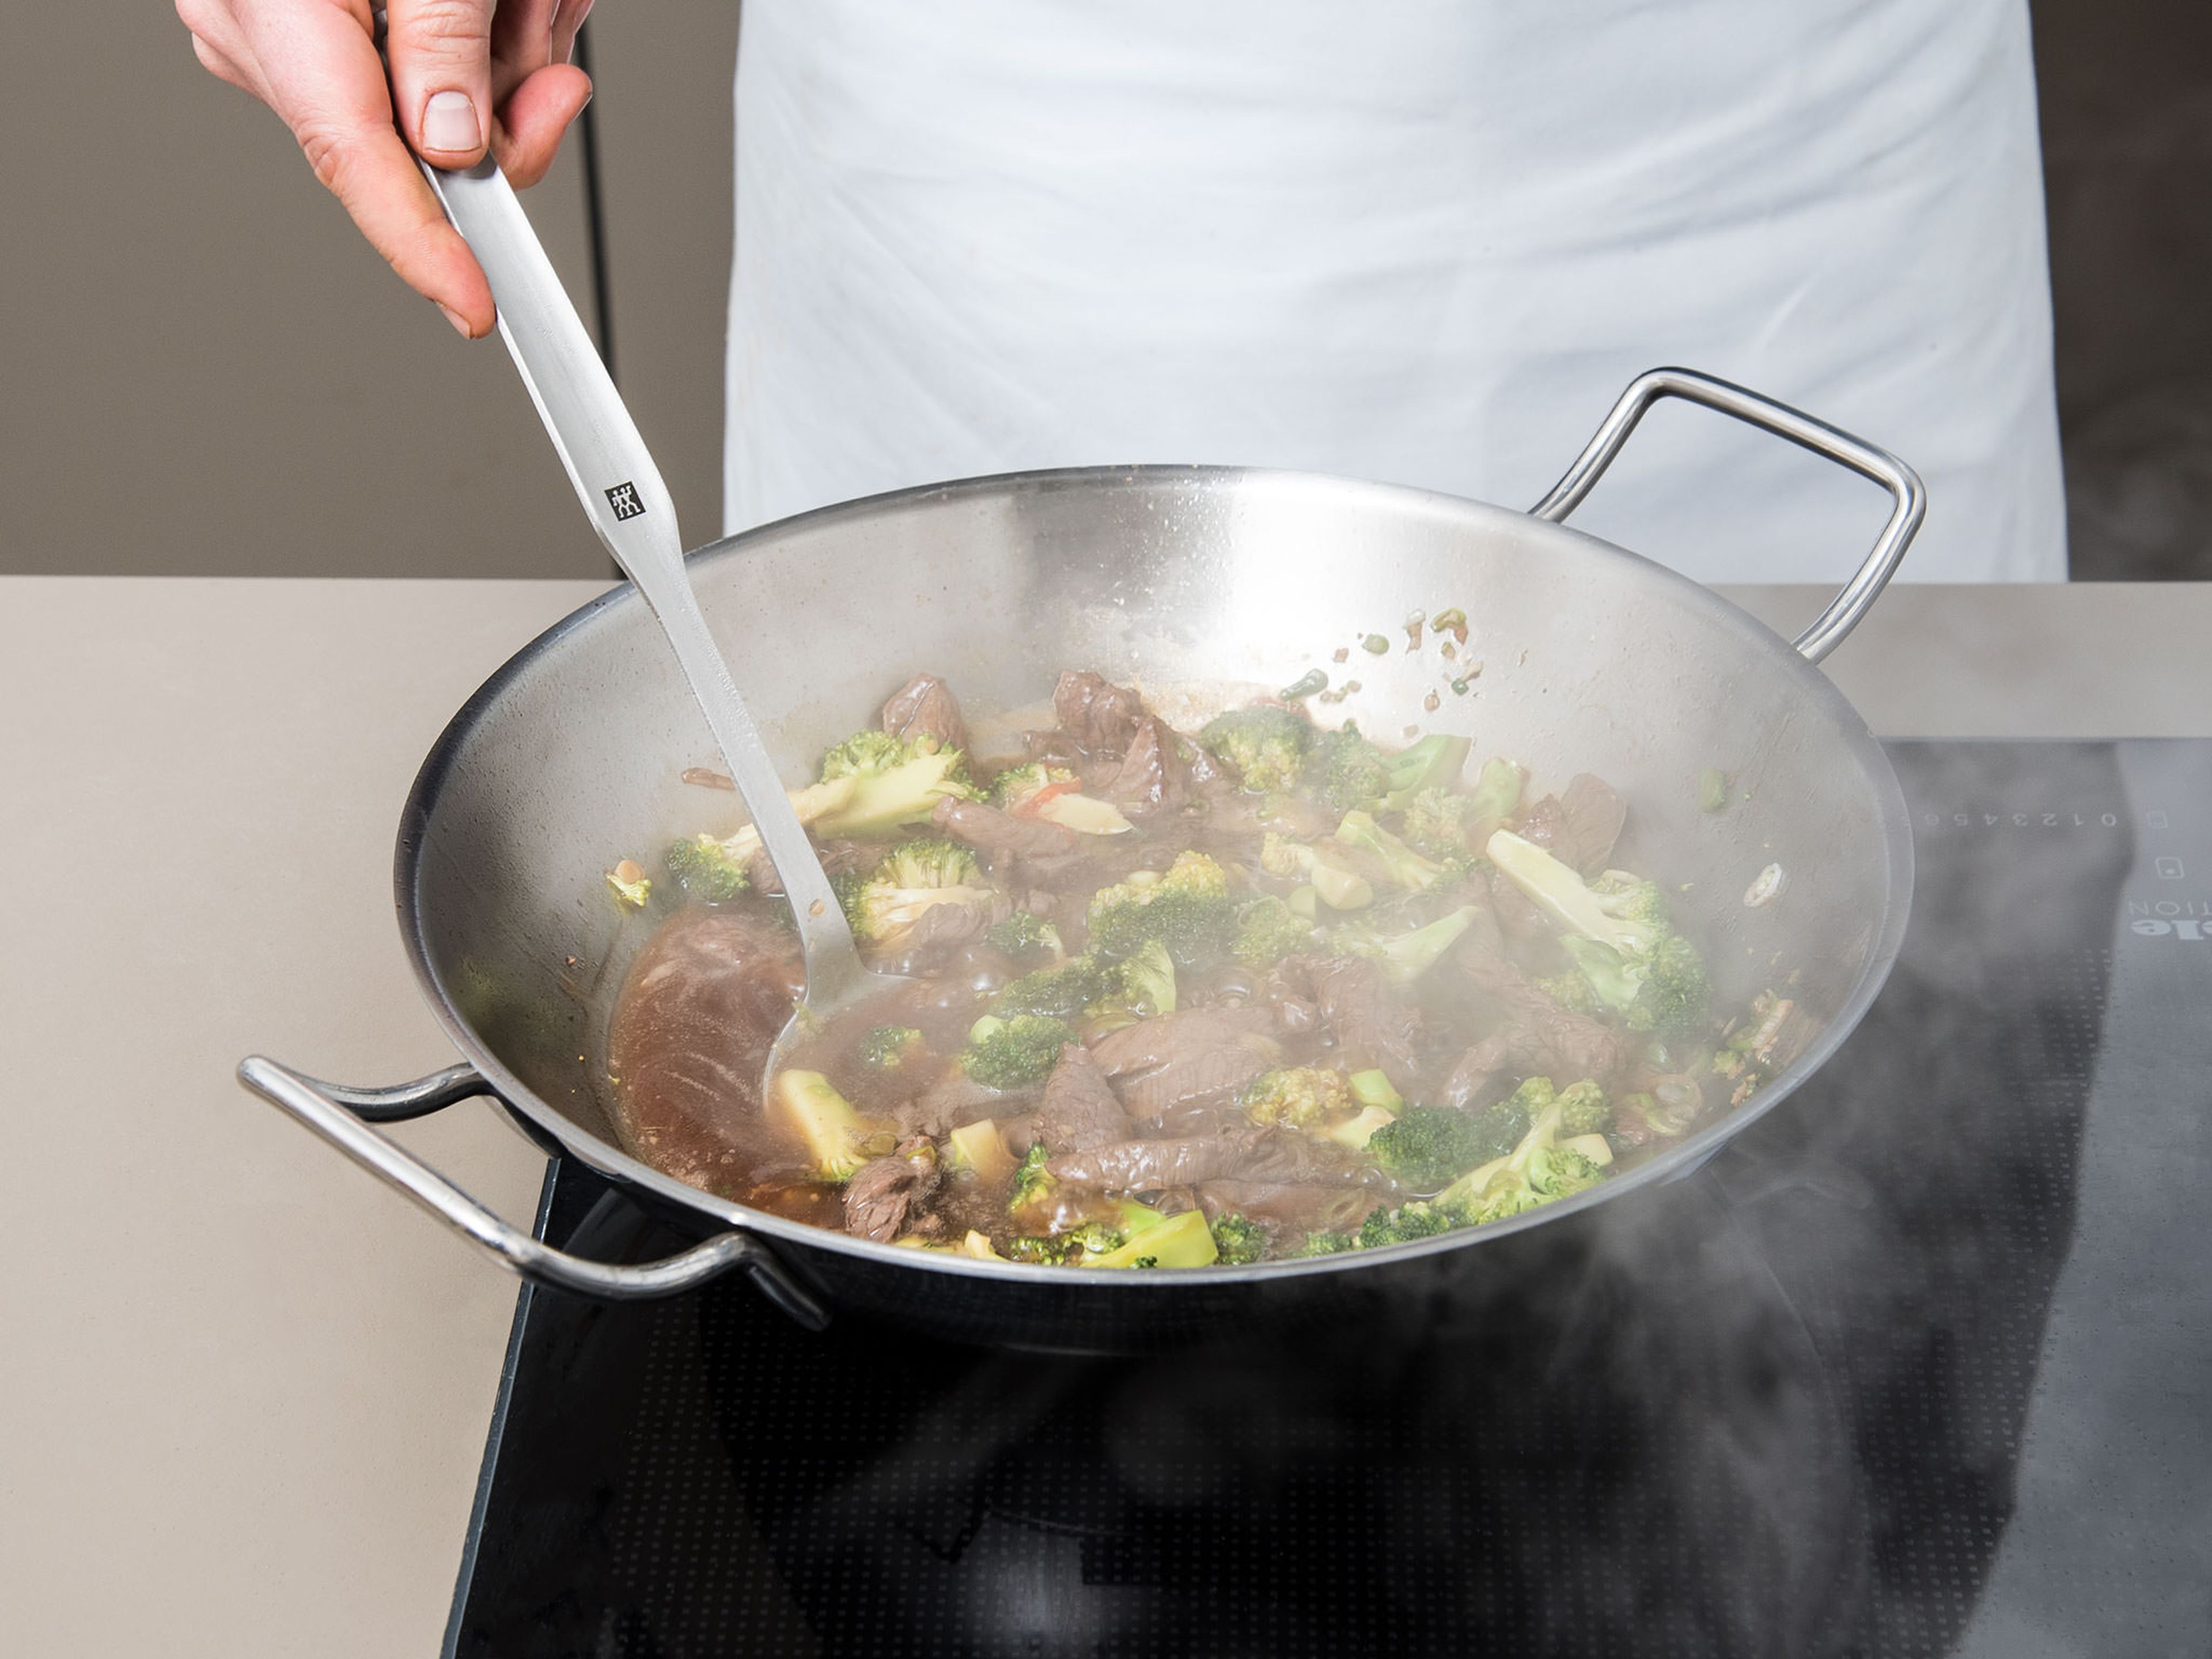 Return the meat to the wok and add the sauce. Mix well and cook until the sauce is thickened, approx. 5 min. Enjoy!